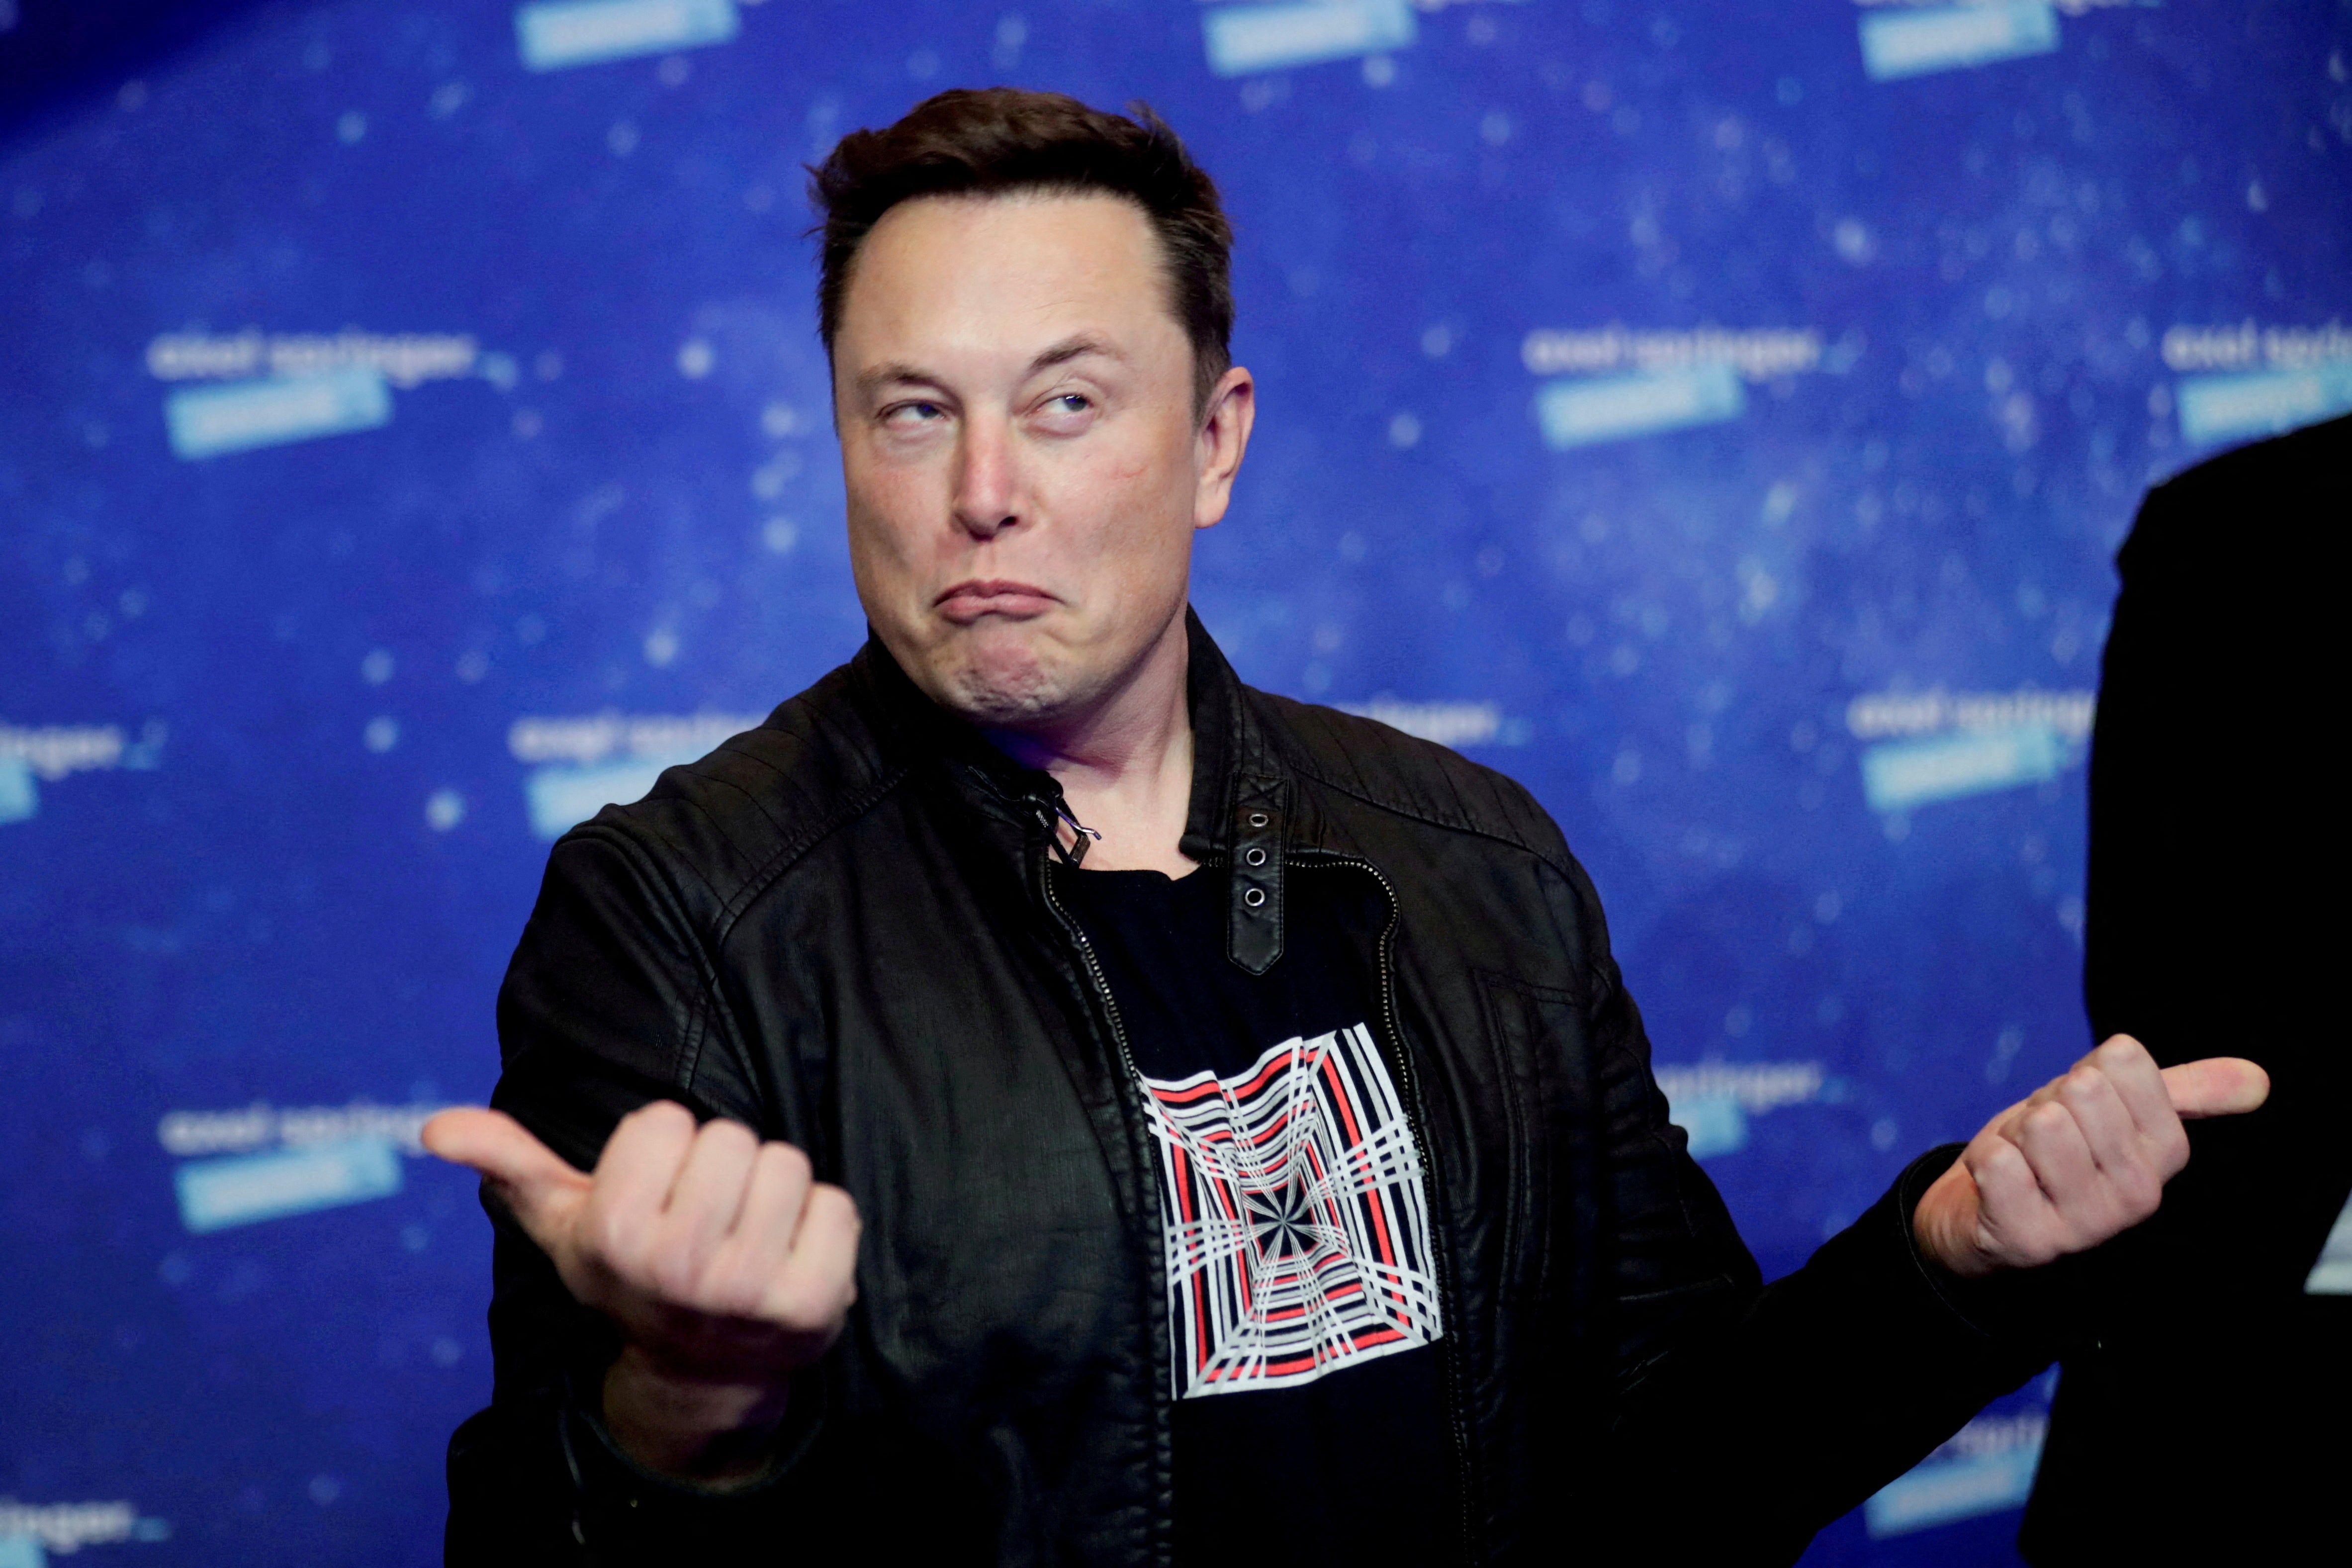 Let’s get one thing straight – if Elon Musk doesn’t own a home right now, that’s by choice